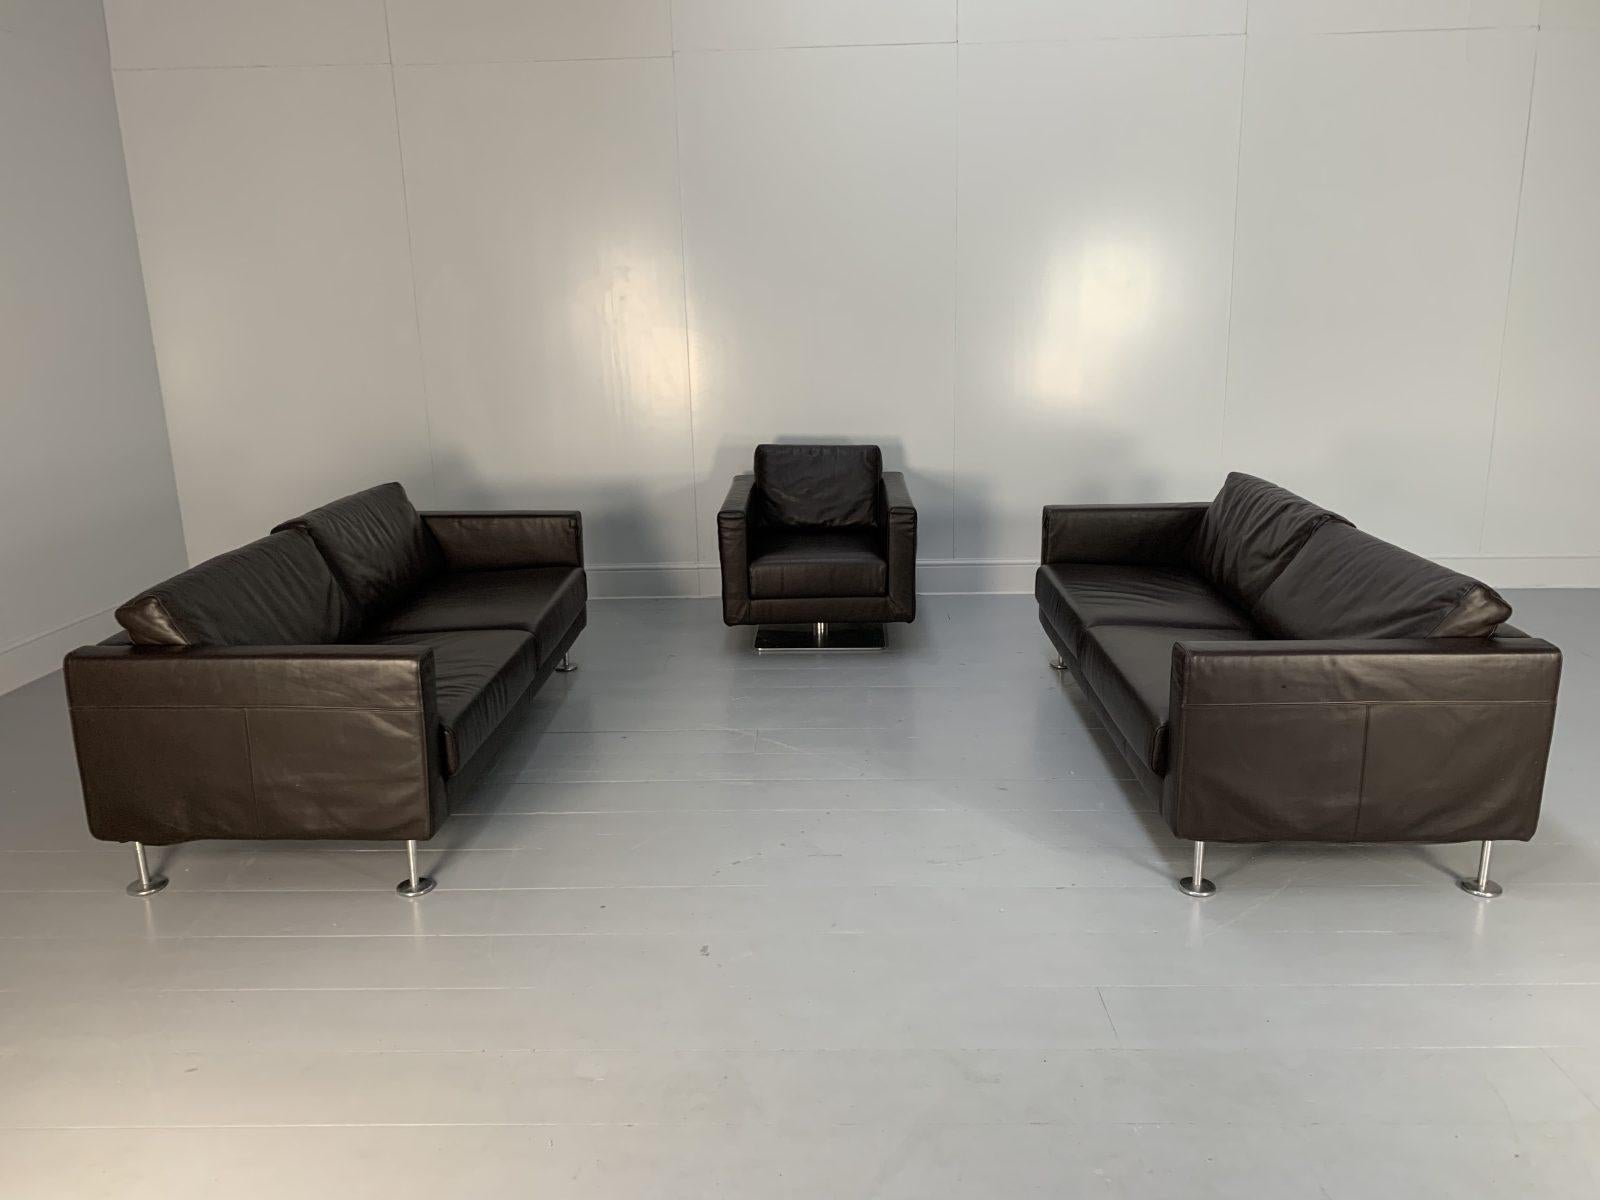 Hello Friends, and welcome to another unmissable offering from Lord Browns Furniture, the UK’s premier resource for fine Sofas and Chairs.

On offer on this occasion is an ultra-rare, superb “Park” suite of seating, consisting of an identical pair